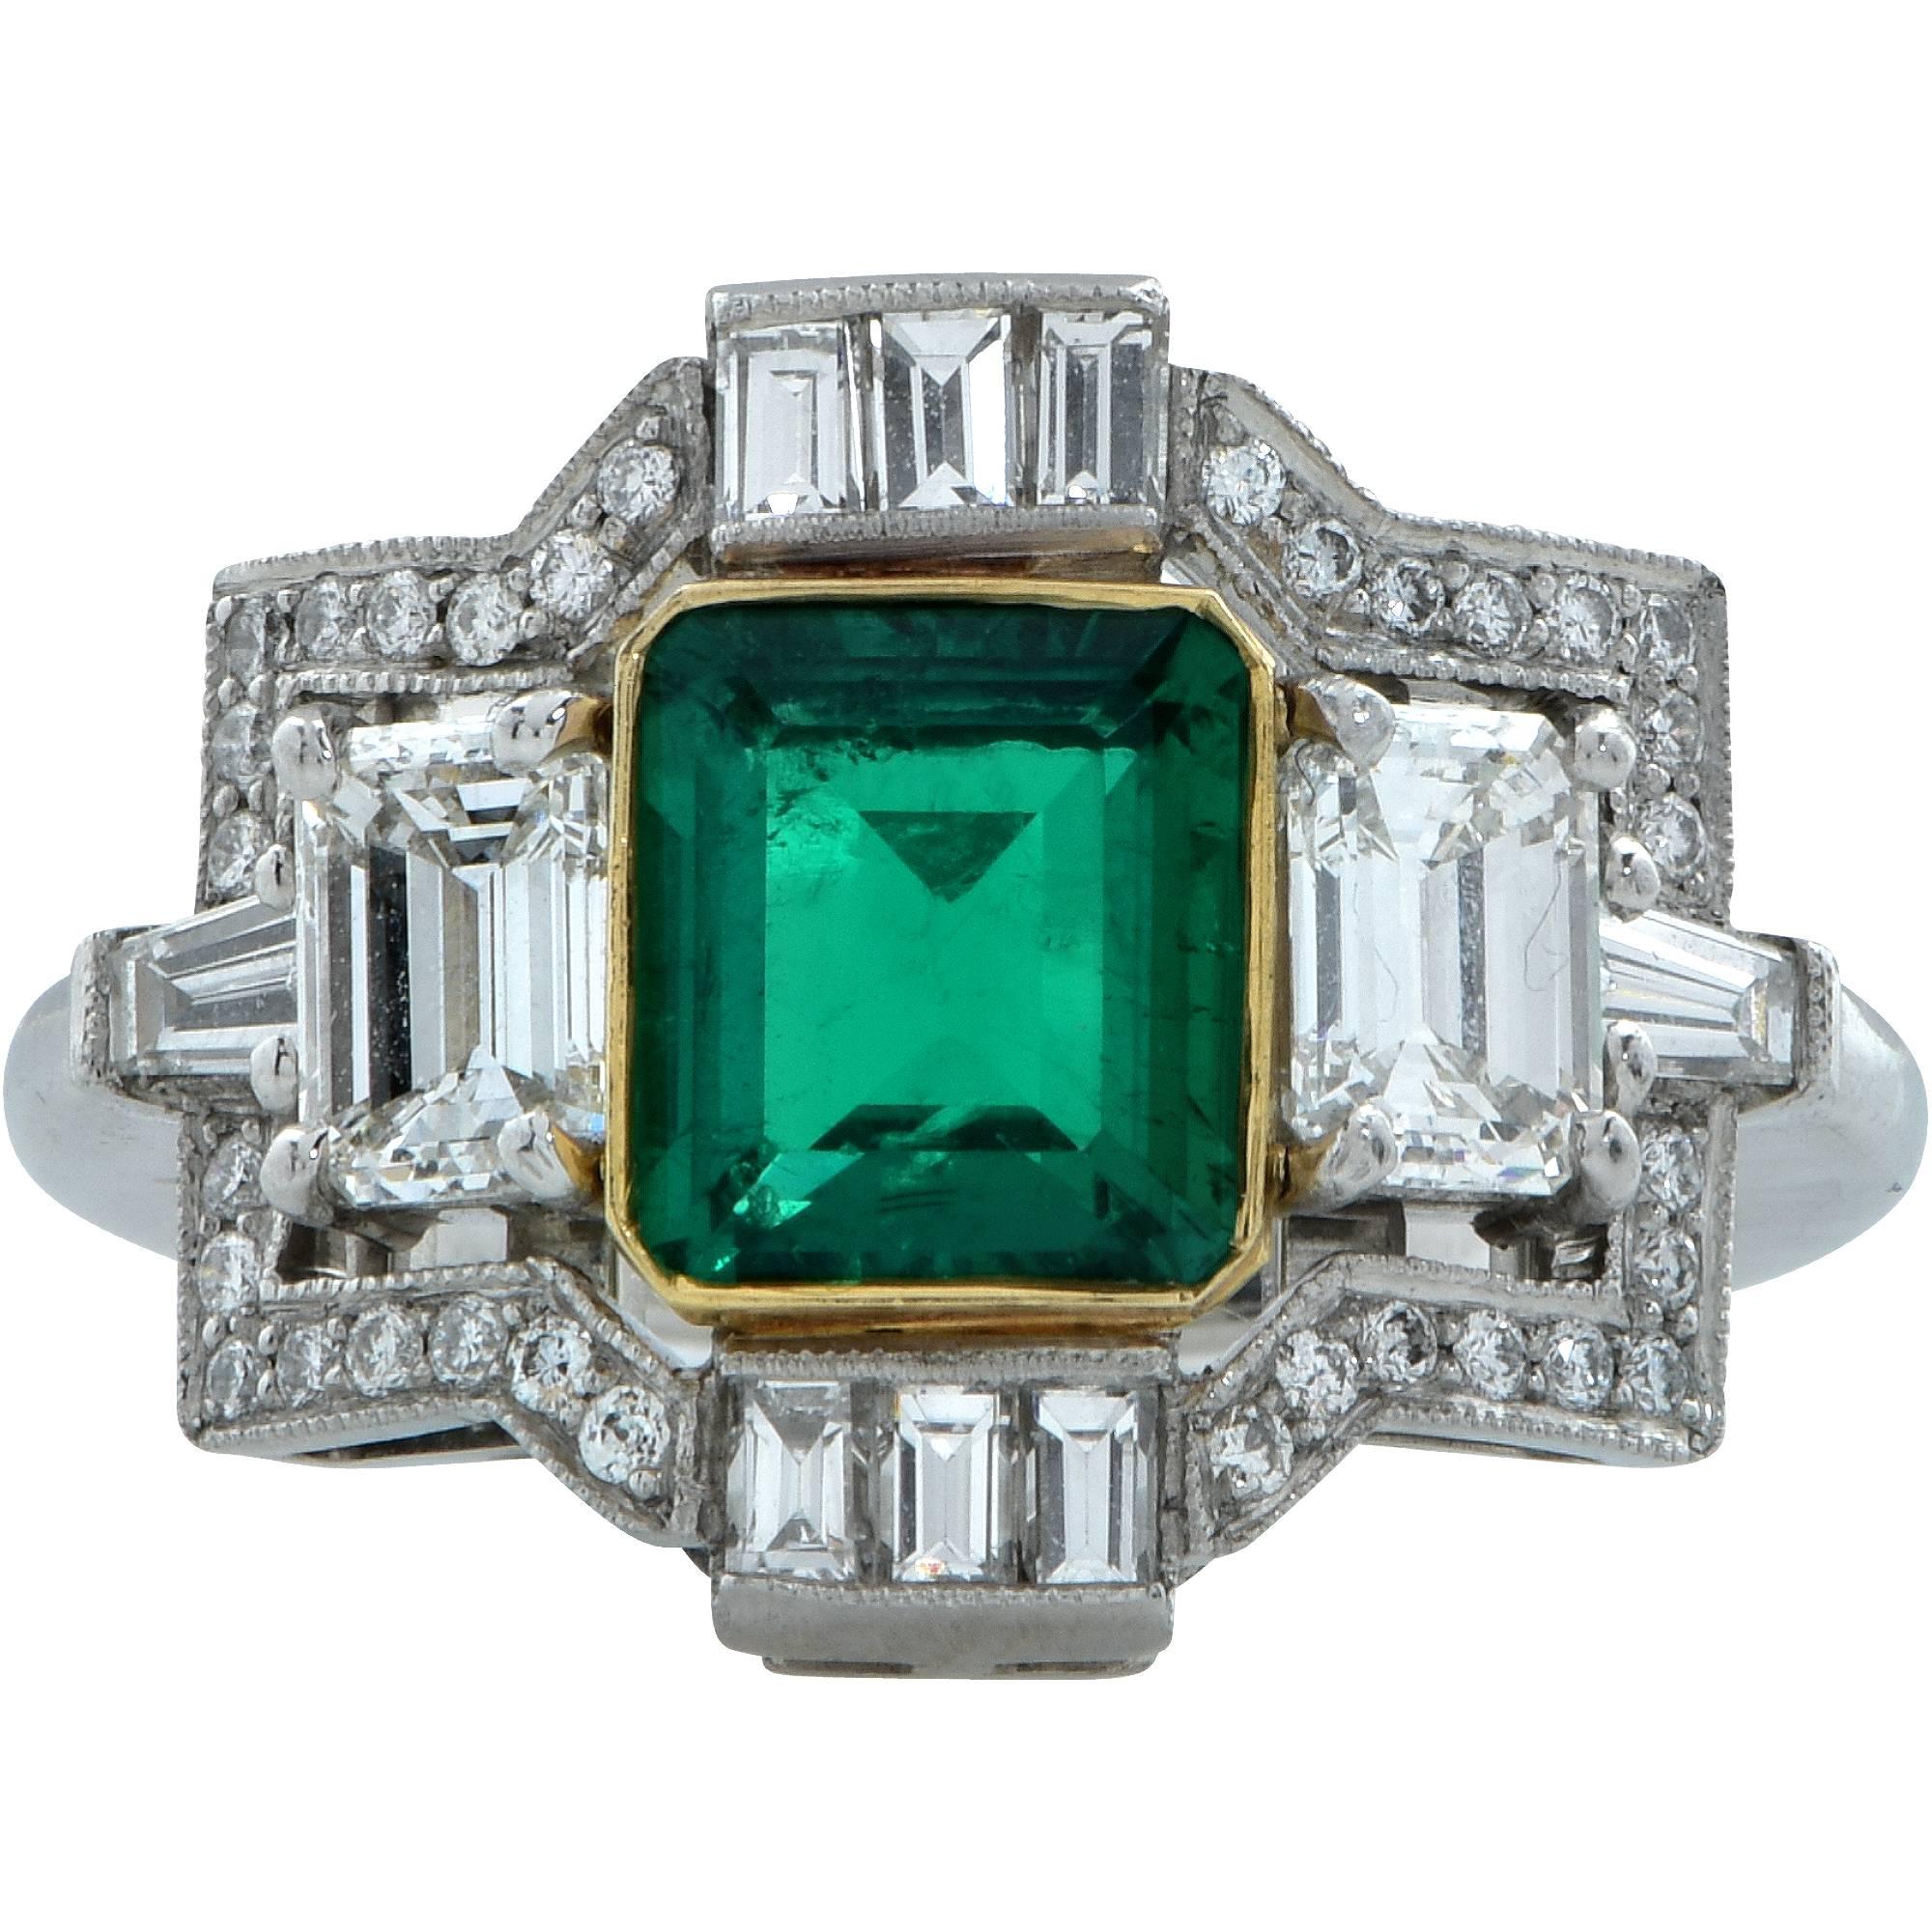 Platinum and 18k yellow gold ring featuring an emerald cut emerald from Colombia weighing approximately 1.50cts. Flanked by 2 emerald cut diamonds weighing 1ct total, G color VS clarity, accented by approximately .55cts total G color VS